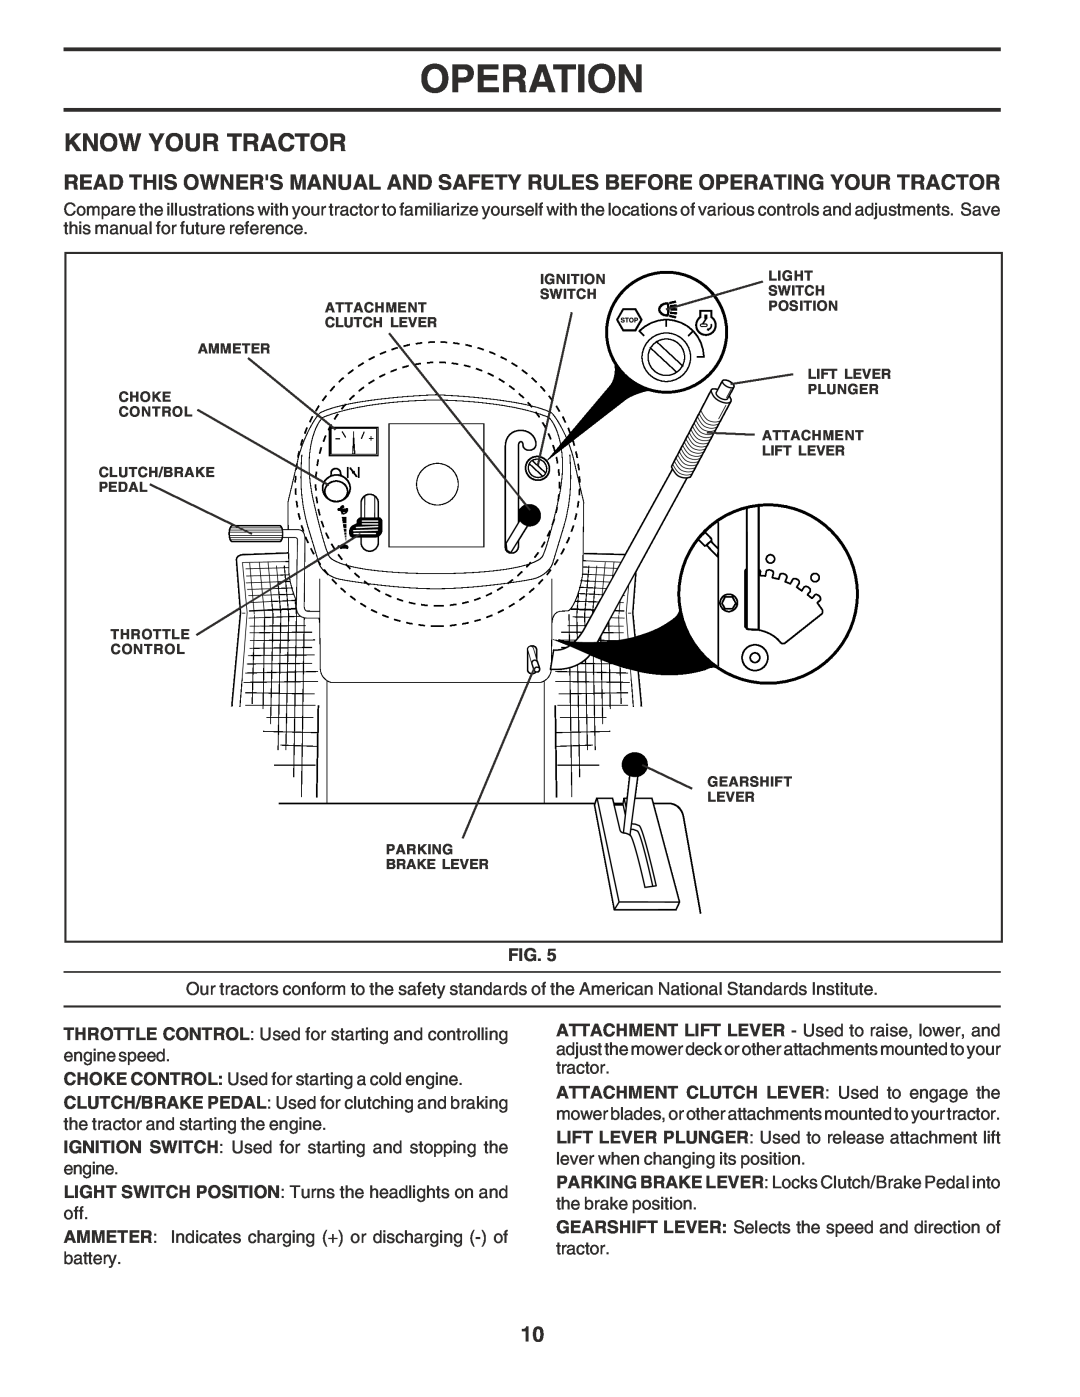 Poulan PPR2042STB owner manual Know Your Tractor, Operation 